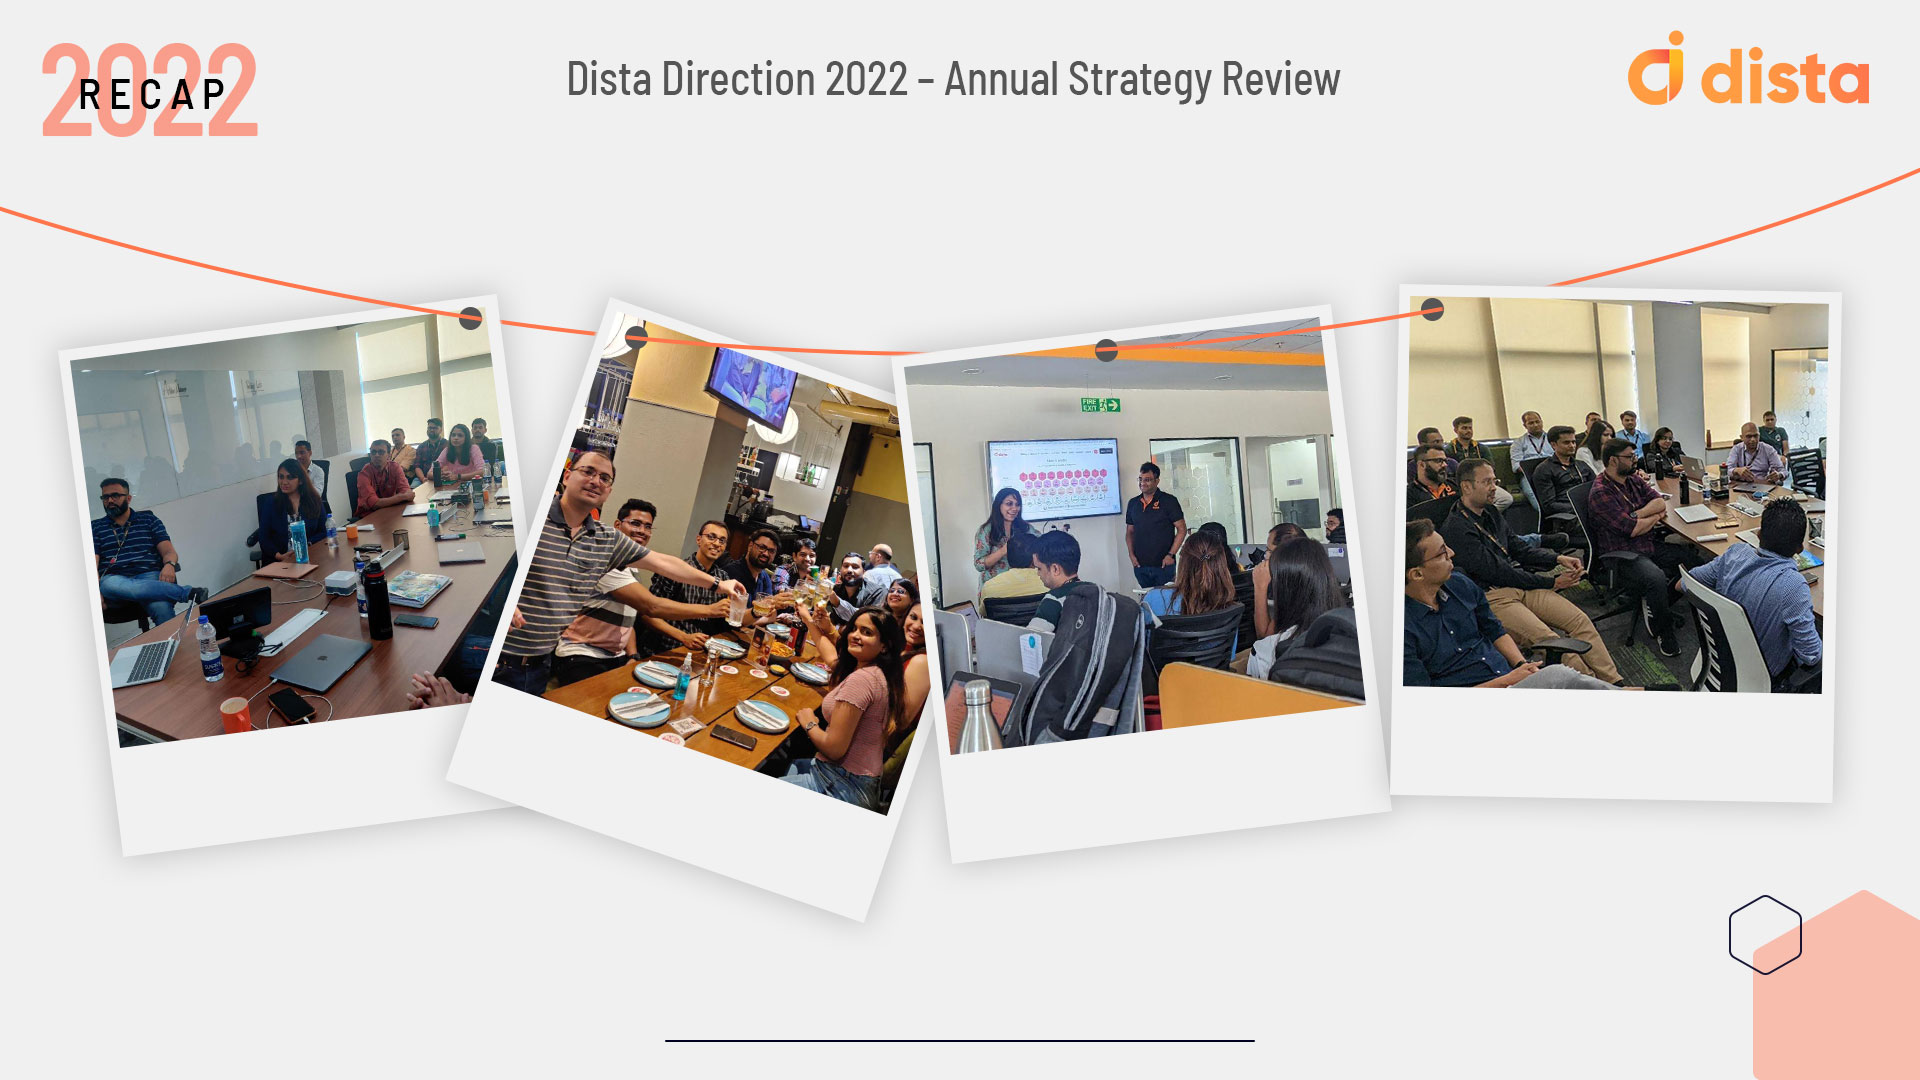 Dista Direction 2022 – Annual Strategy Review